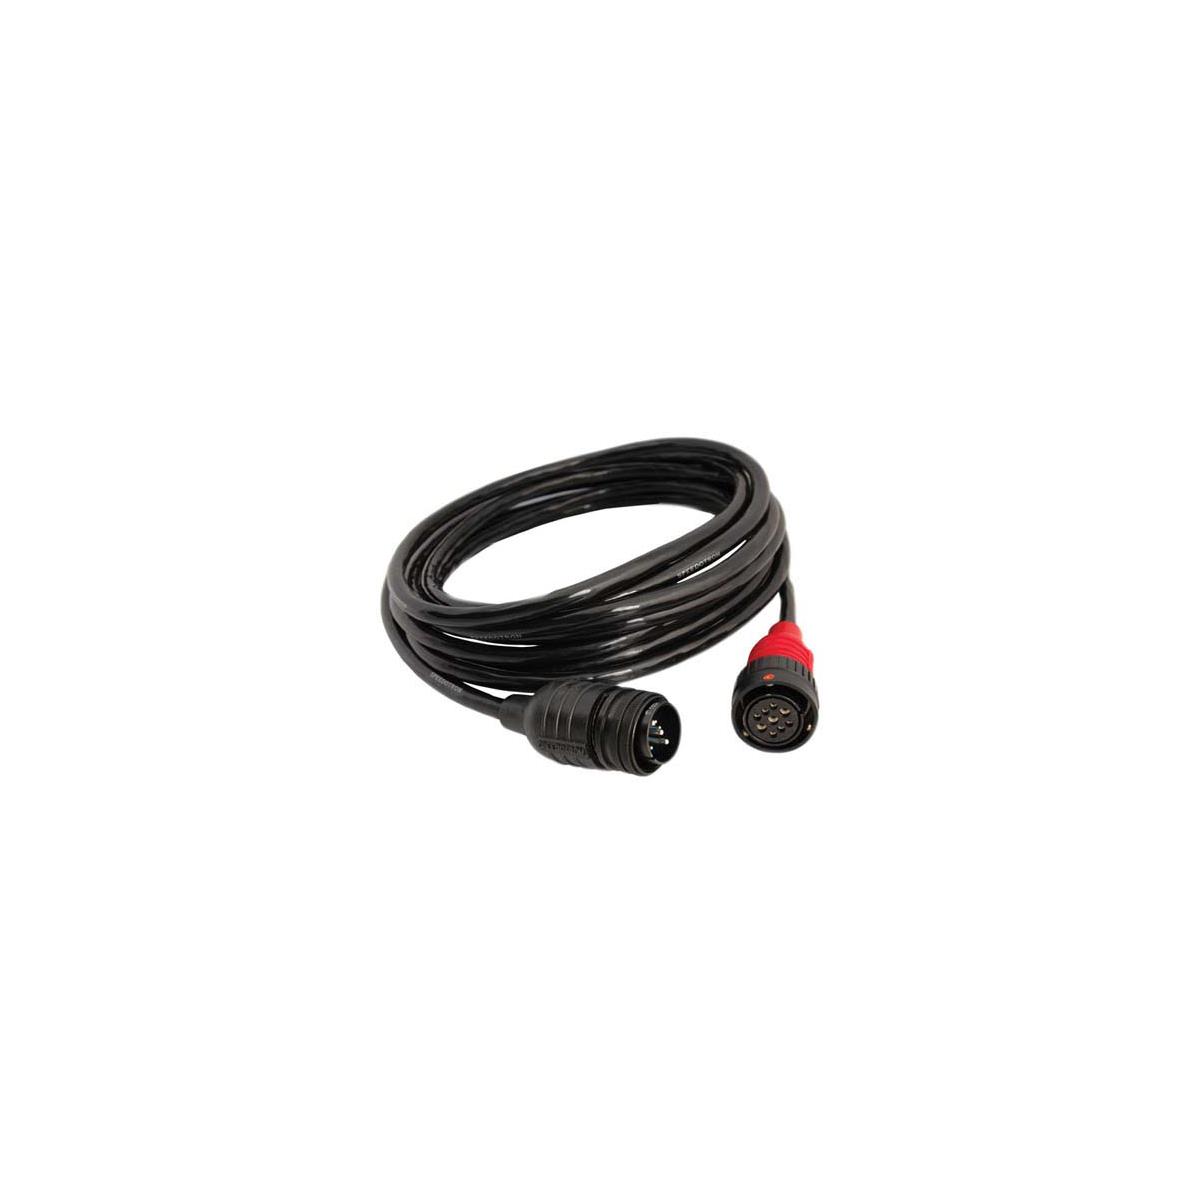 Image of Speedotron 20' Detachable Head Cable for 206VF Light Unit